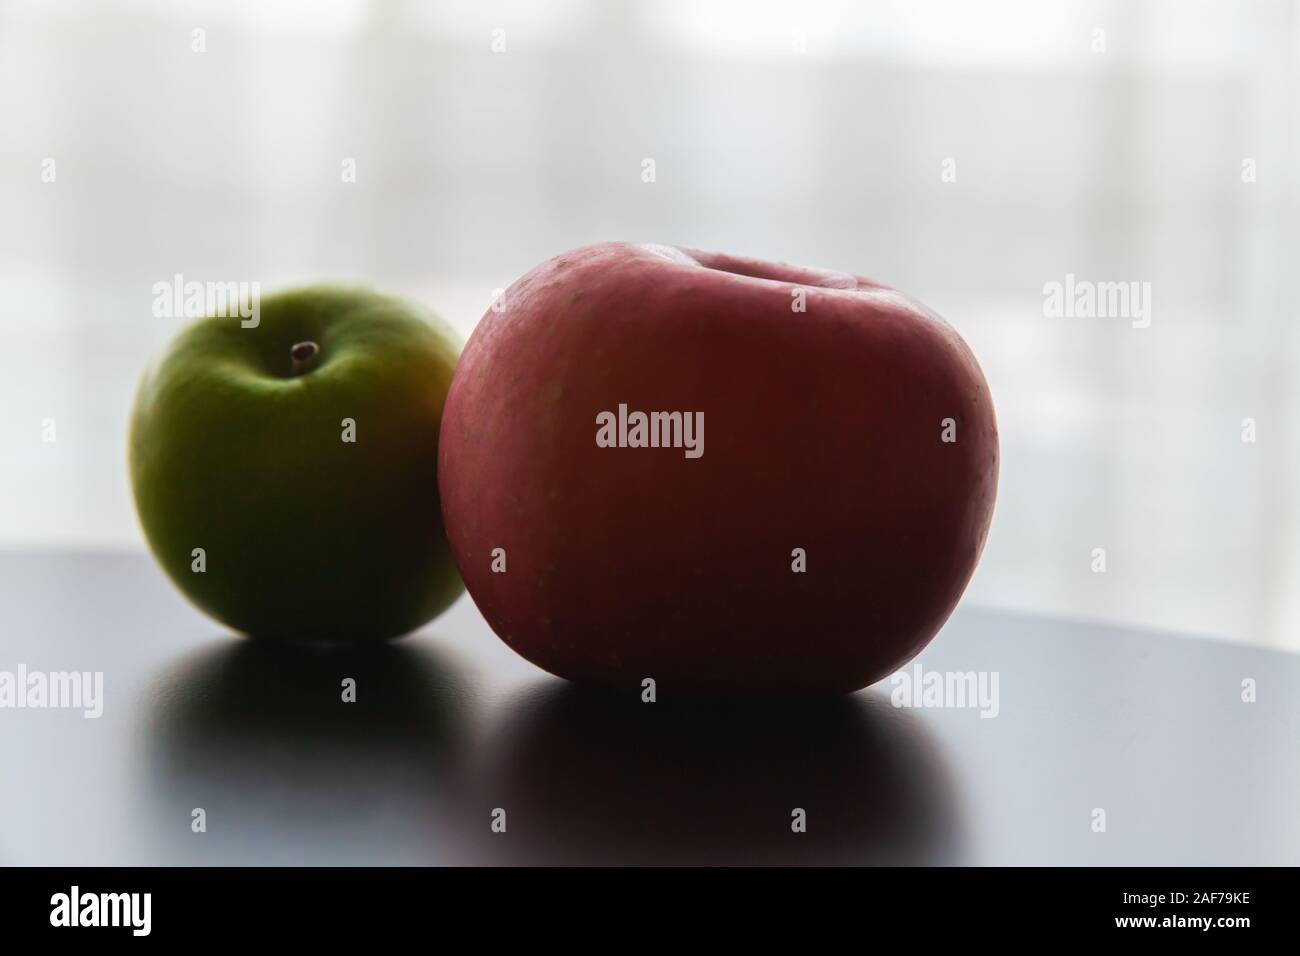 Two apples green and red lay on a black desk. Close up low-key photo with soft selective focus Stock Photo